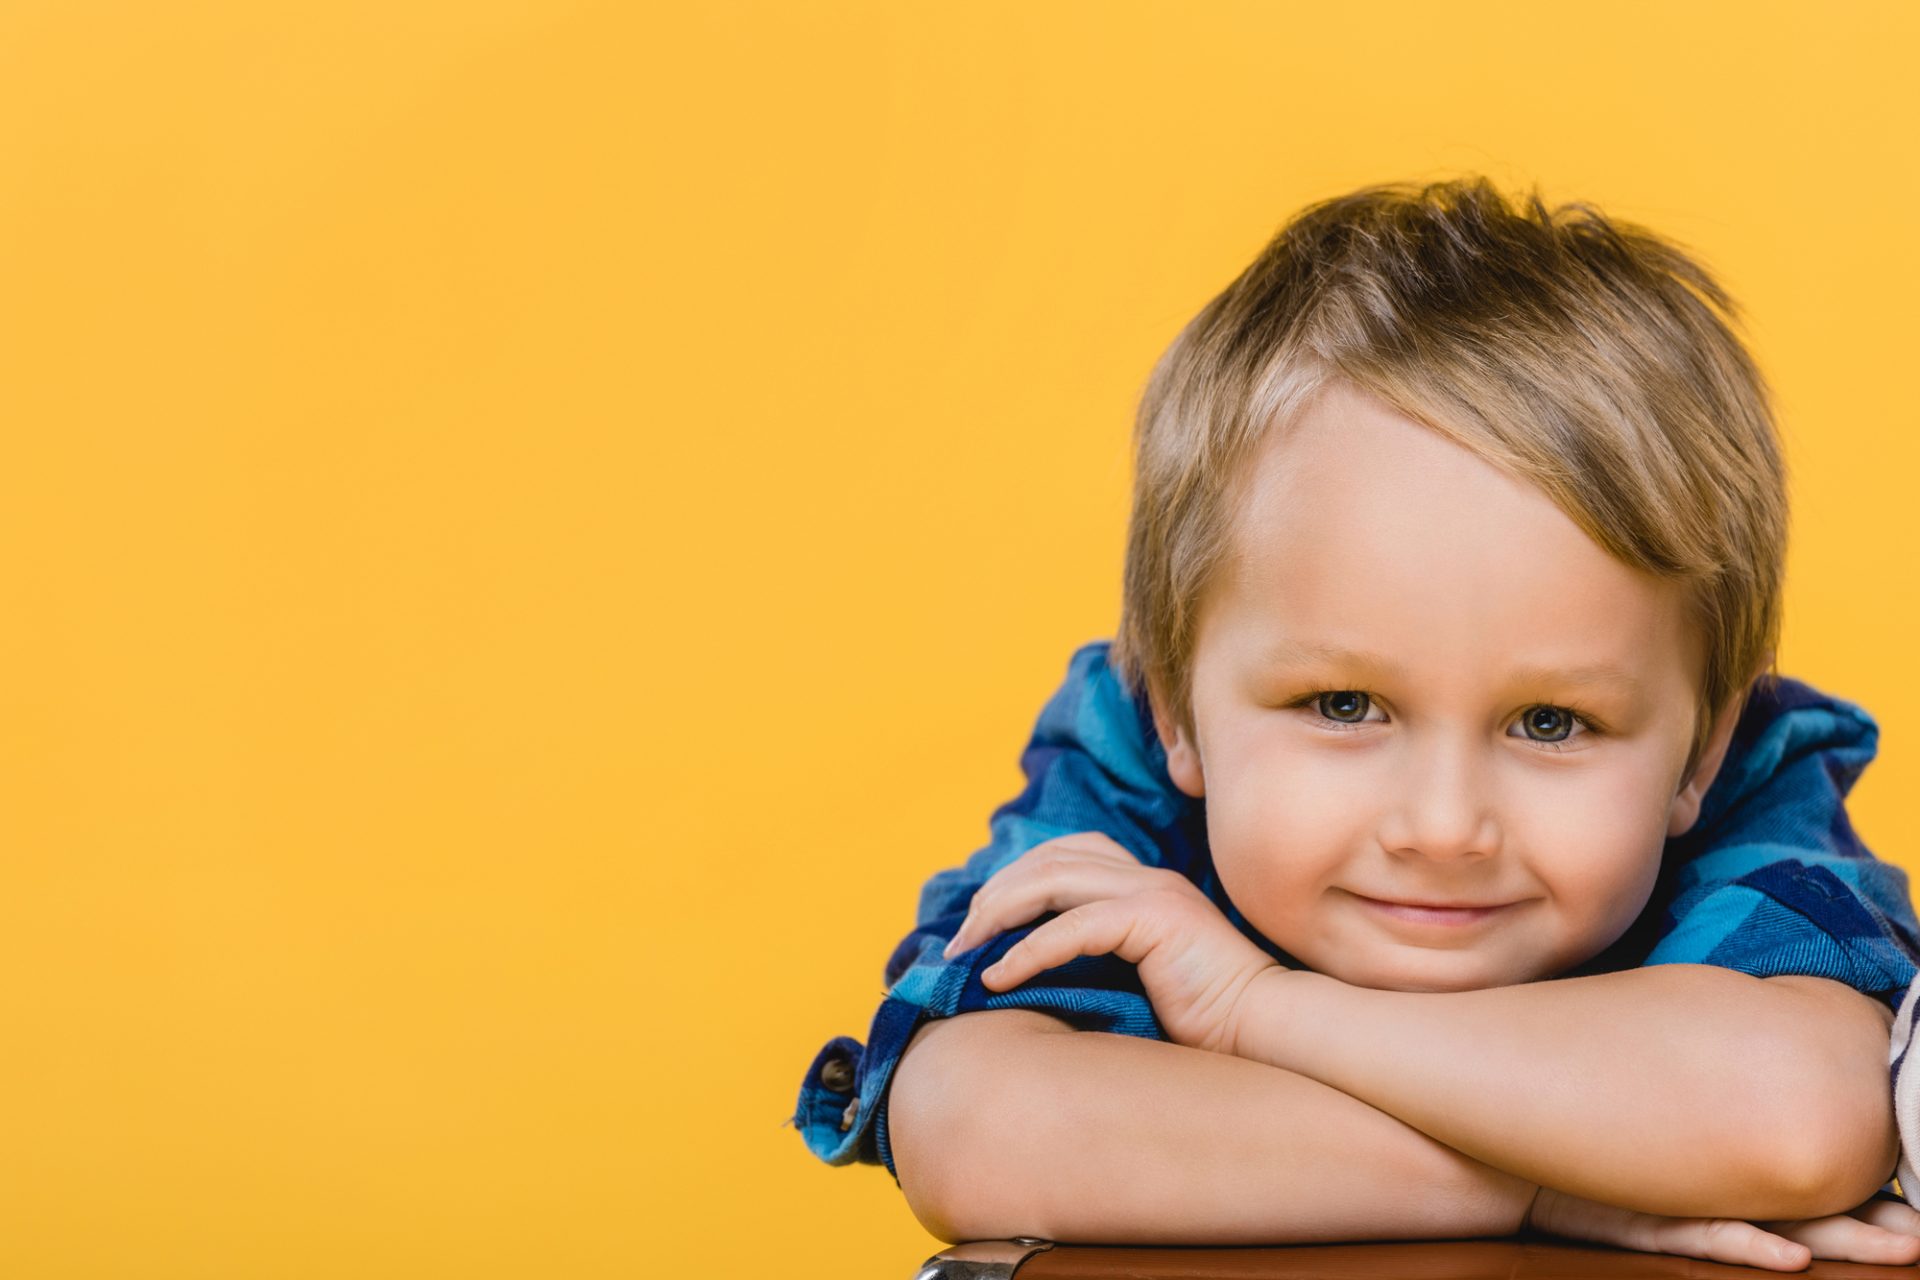 young boy smiling on yellow background